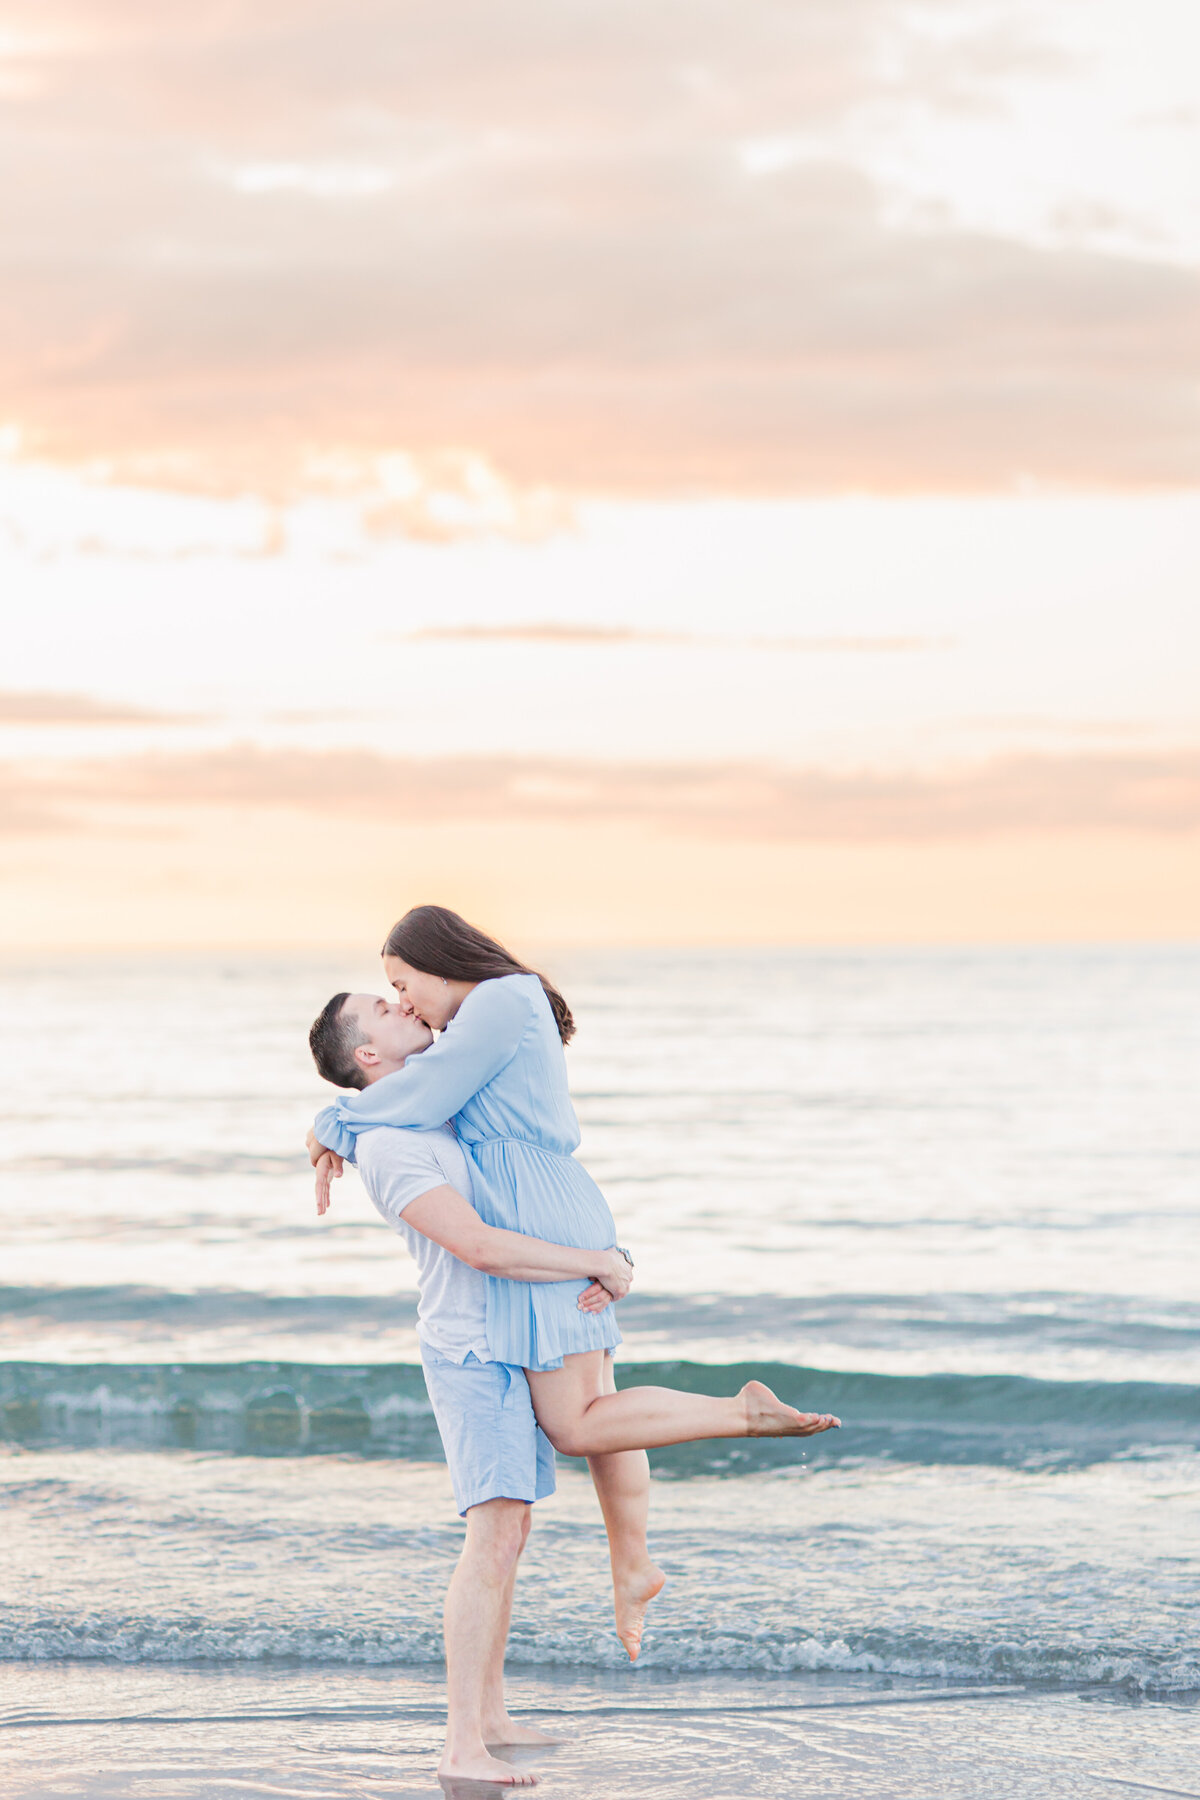 Man picking up and kissing a woman representing MA beach engagement photography